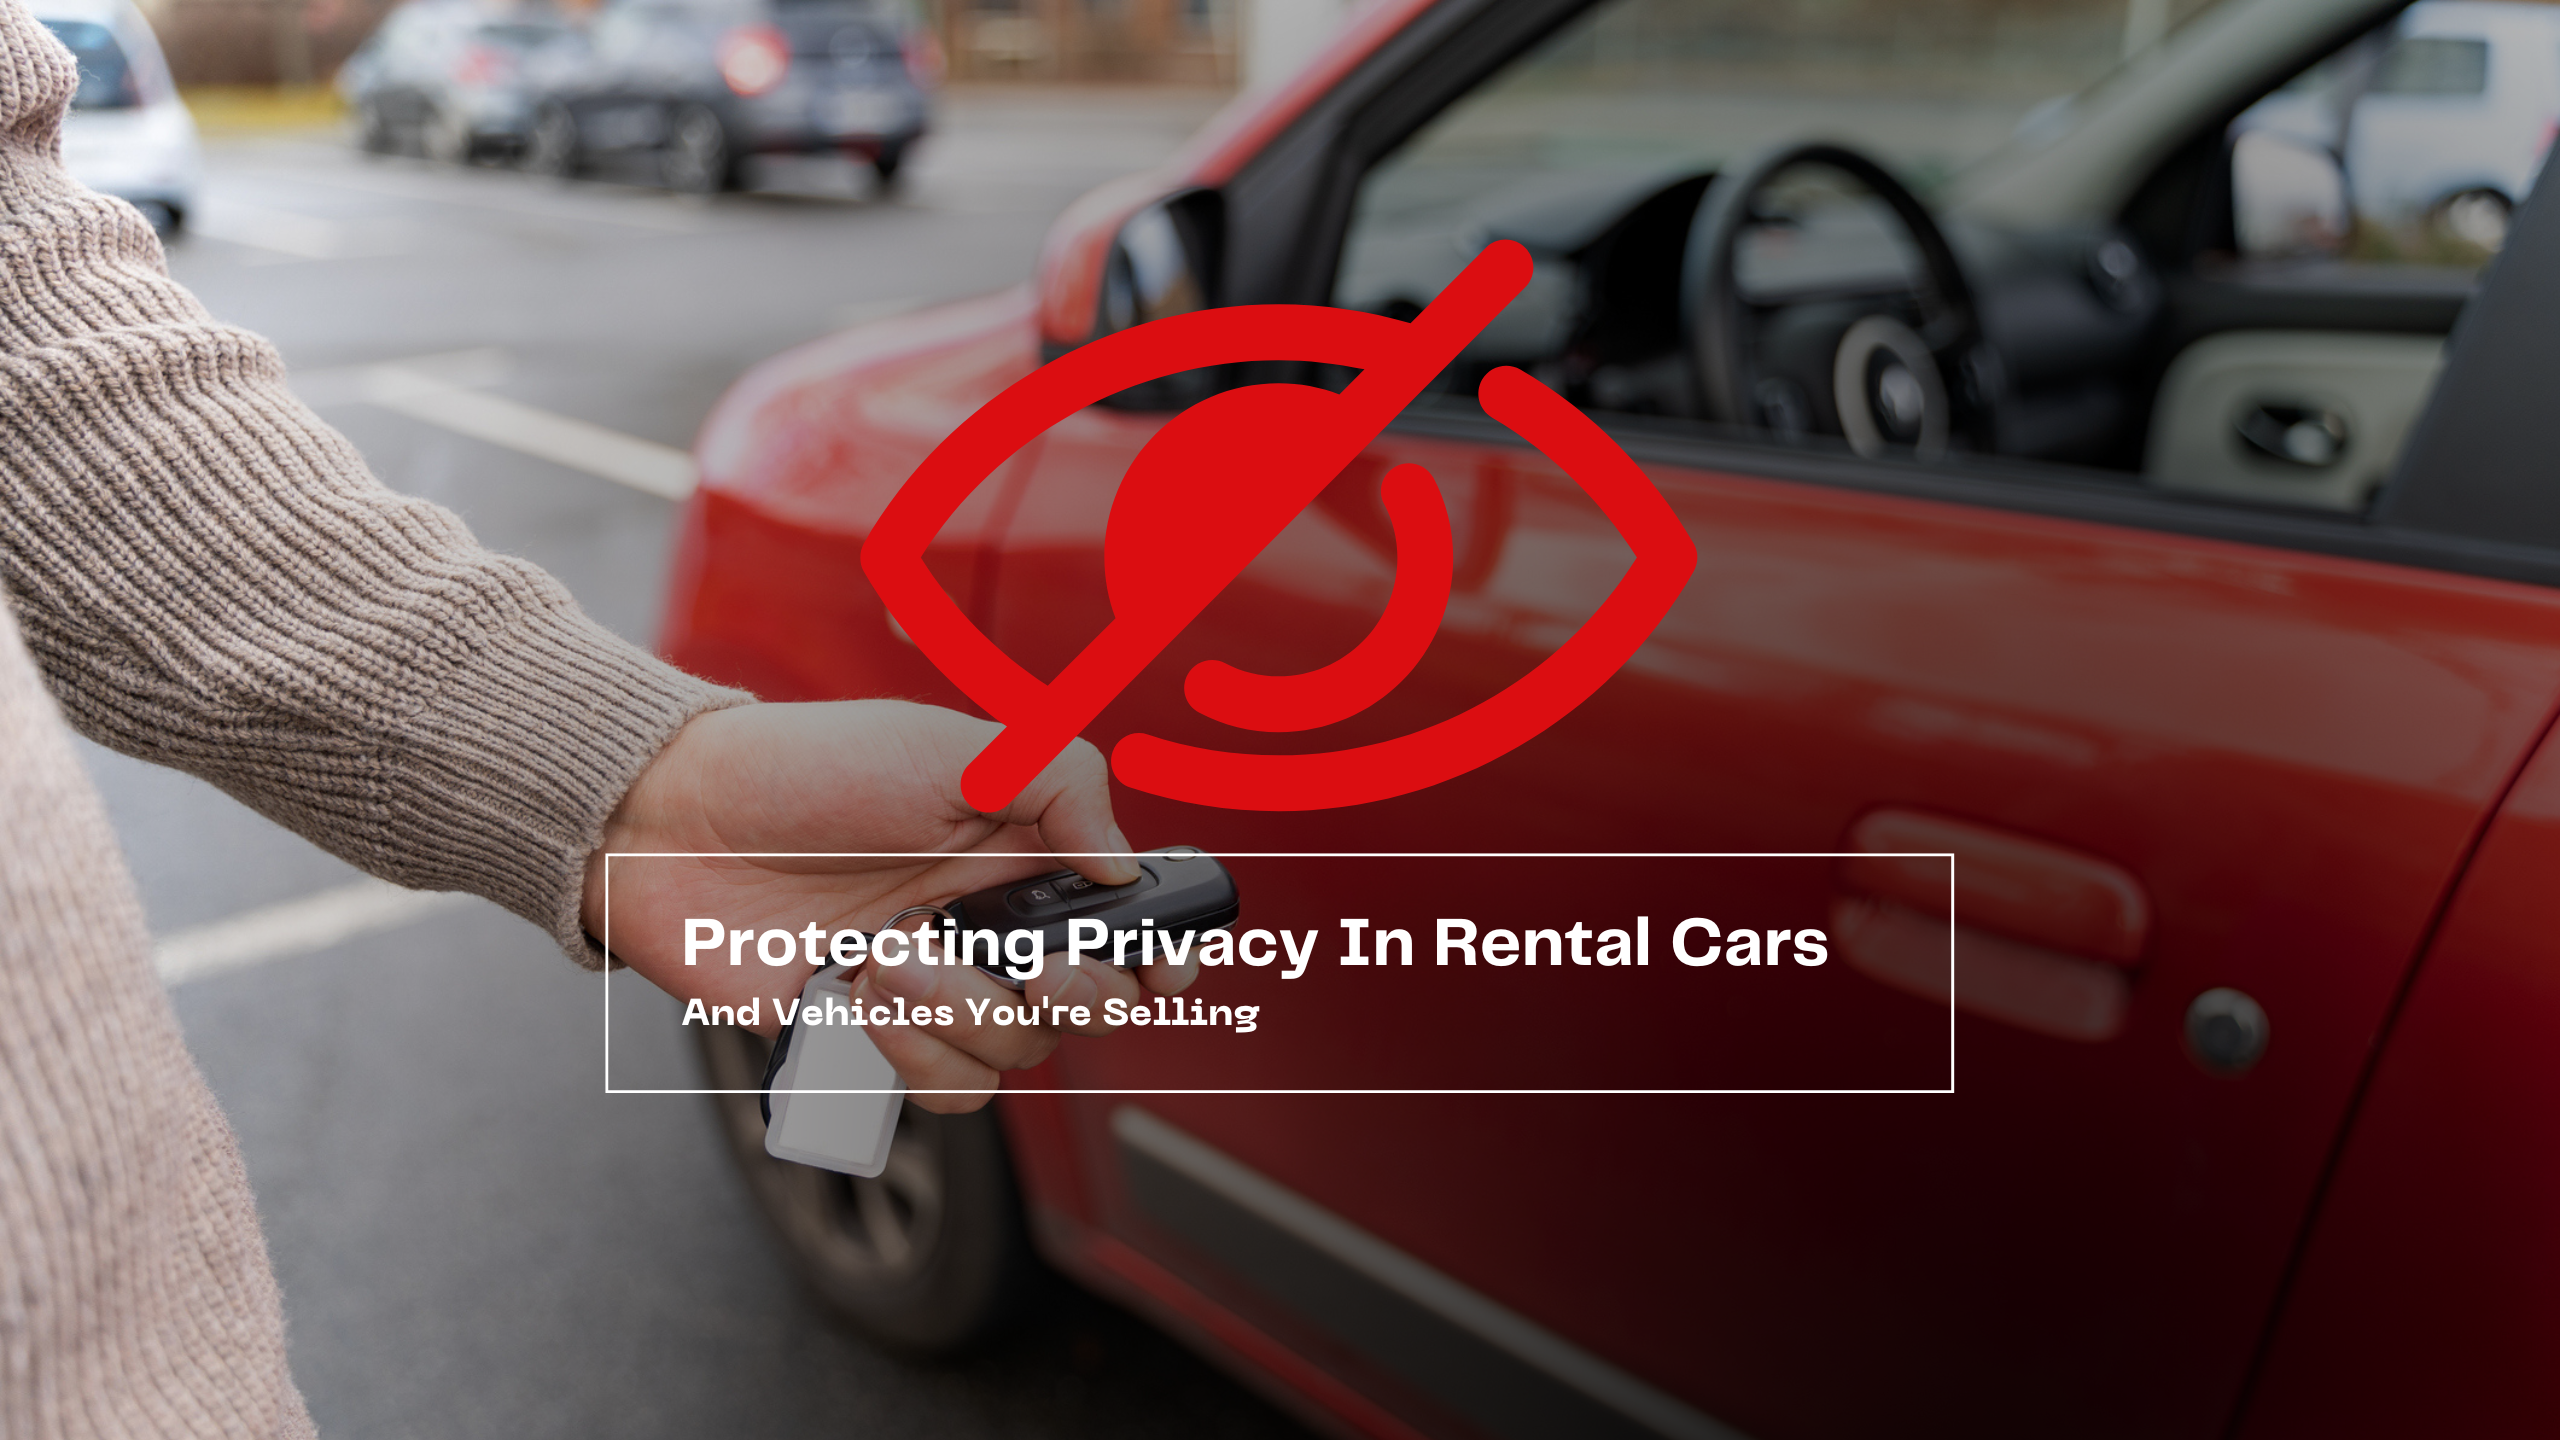 Are You Leaving Your Personal Data On Rental Cars?